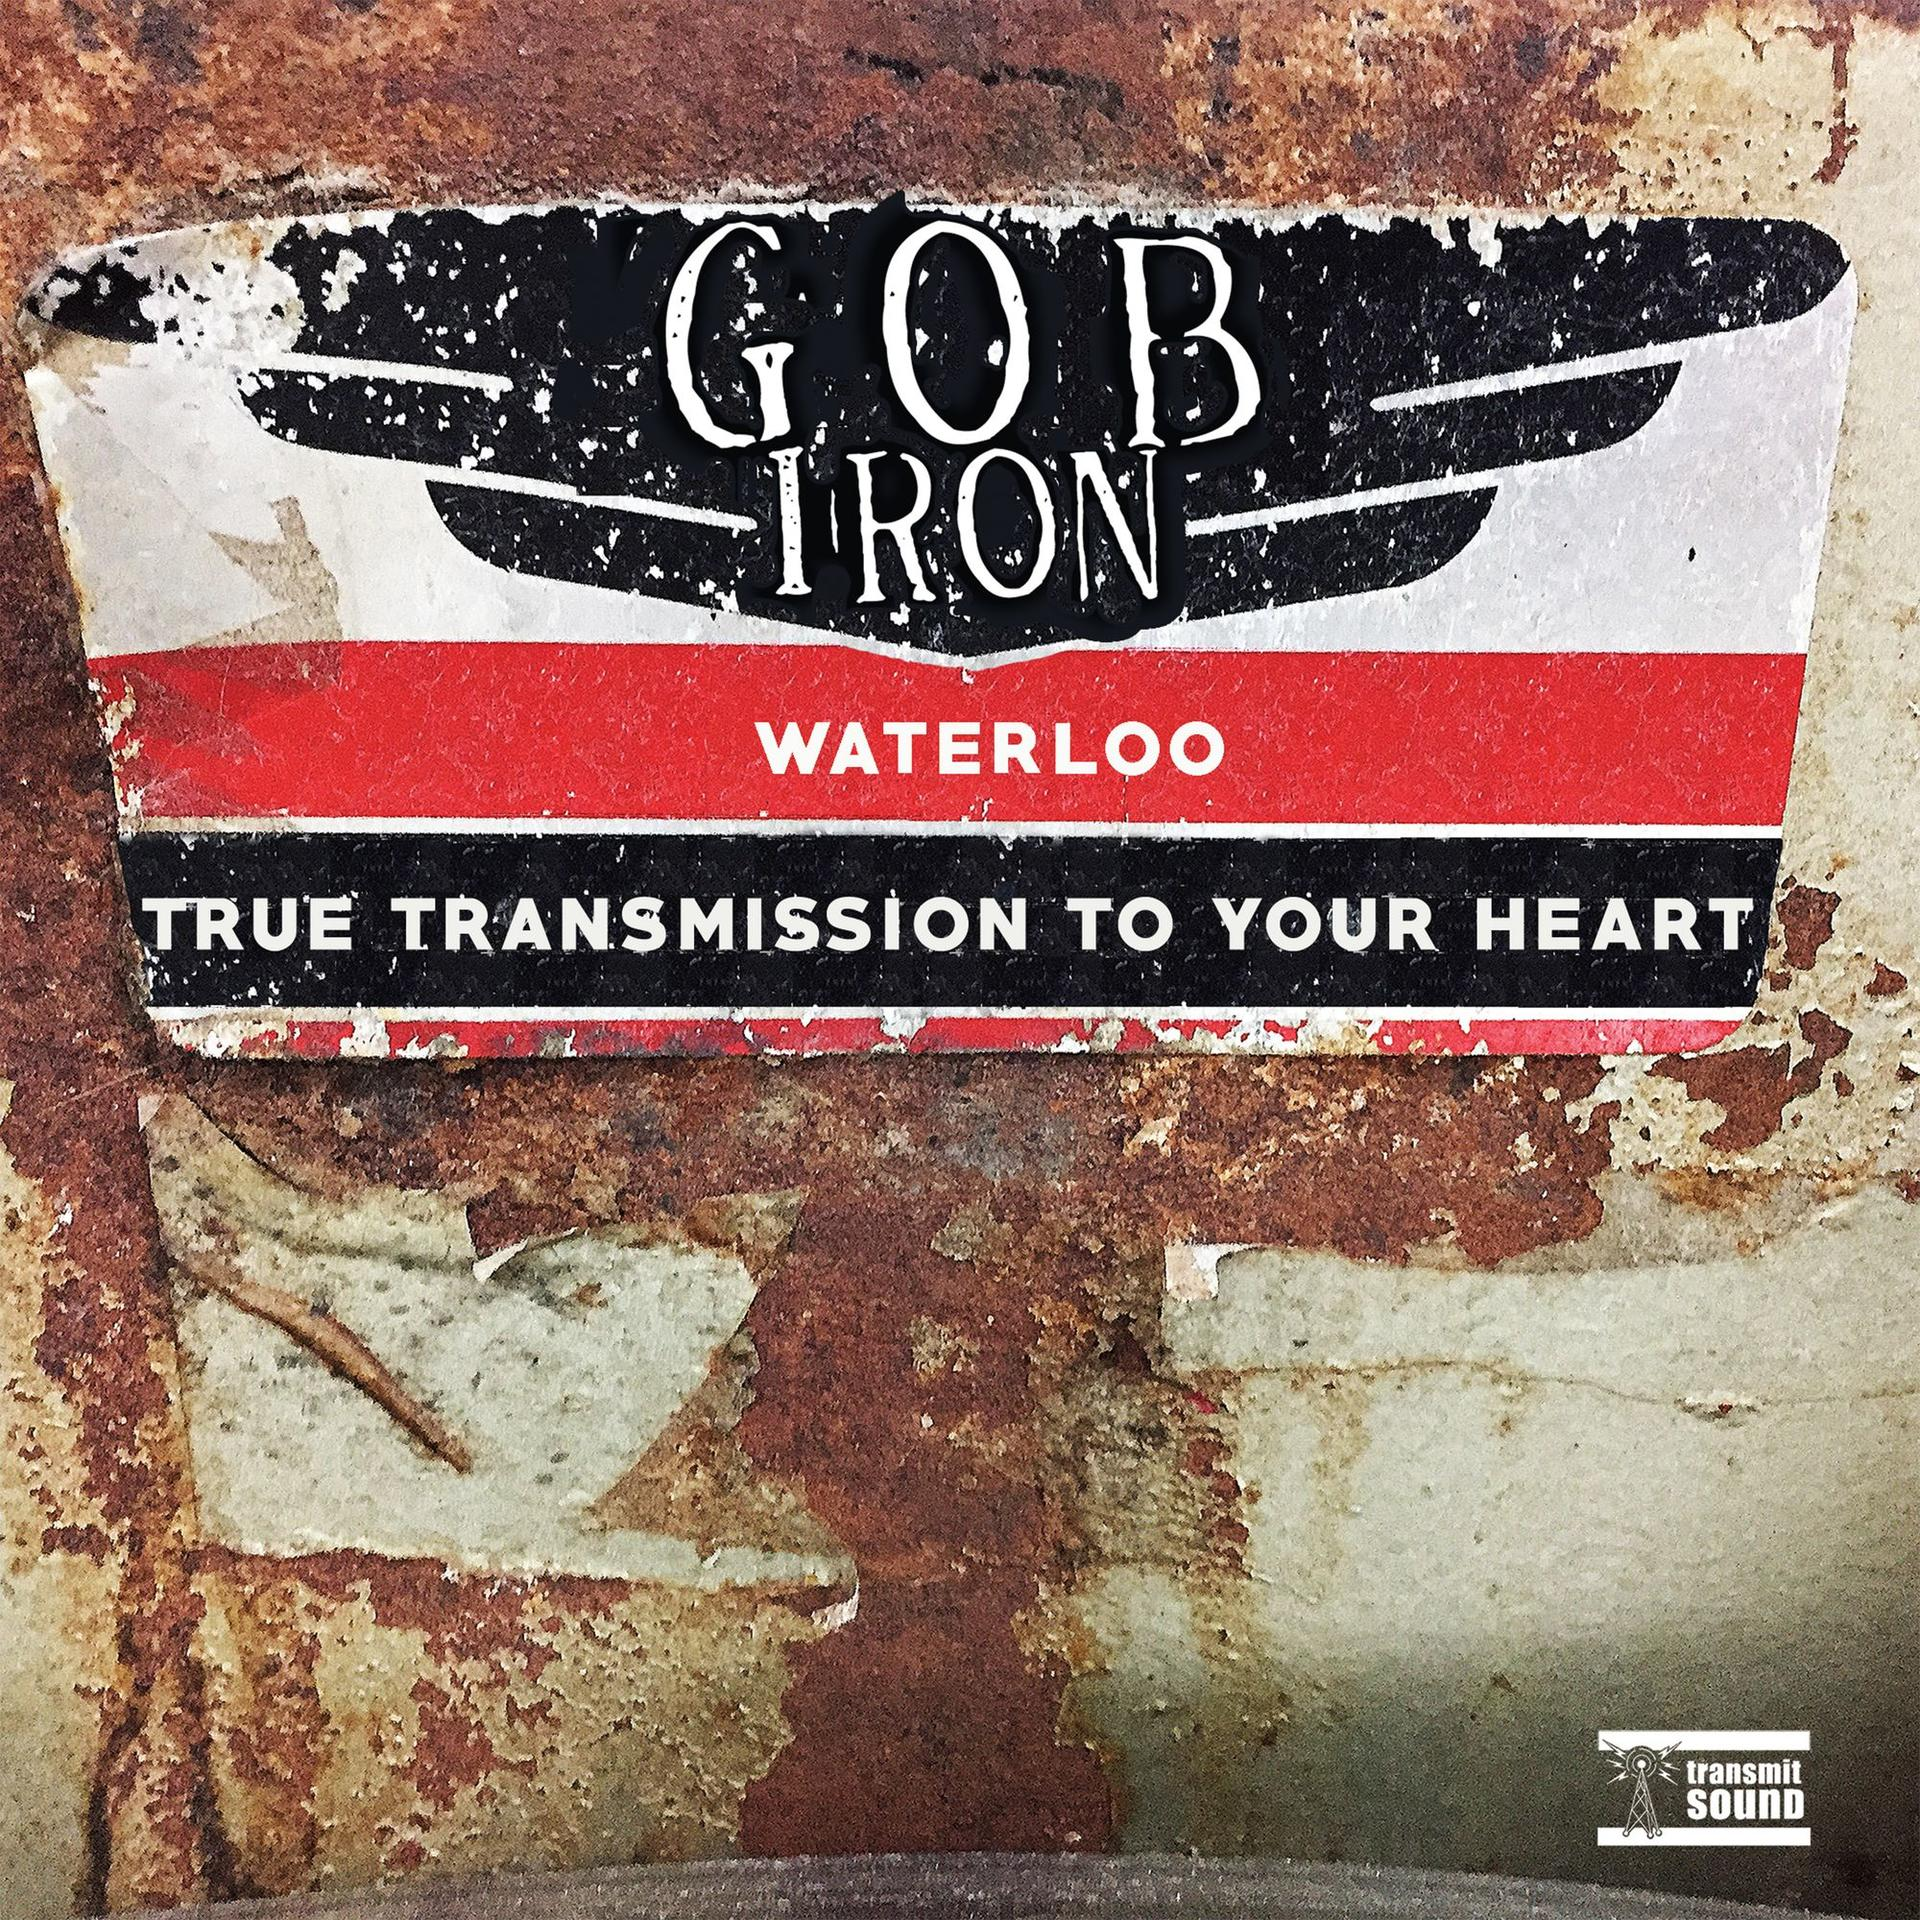 YOUR Iron (Vinyl) - HEART - Gob TO TRANSMISSION 7-WATERLOO/TRUE